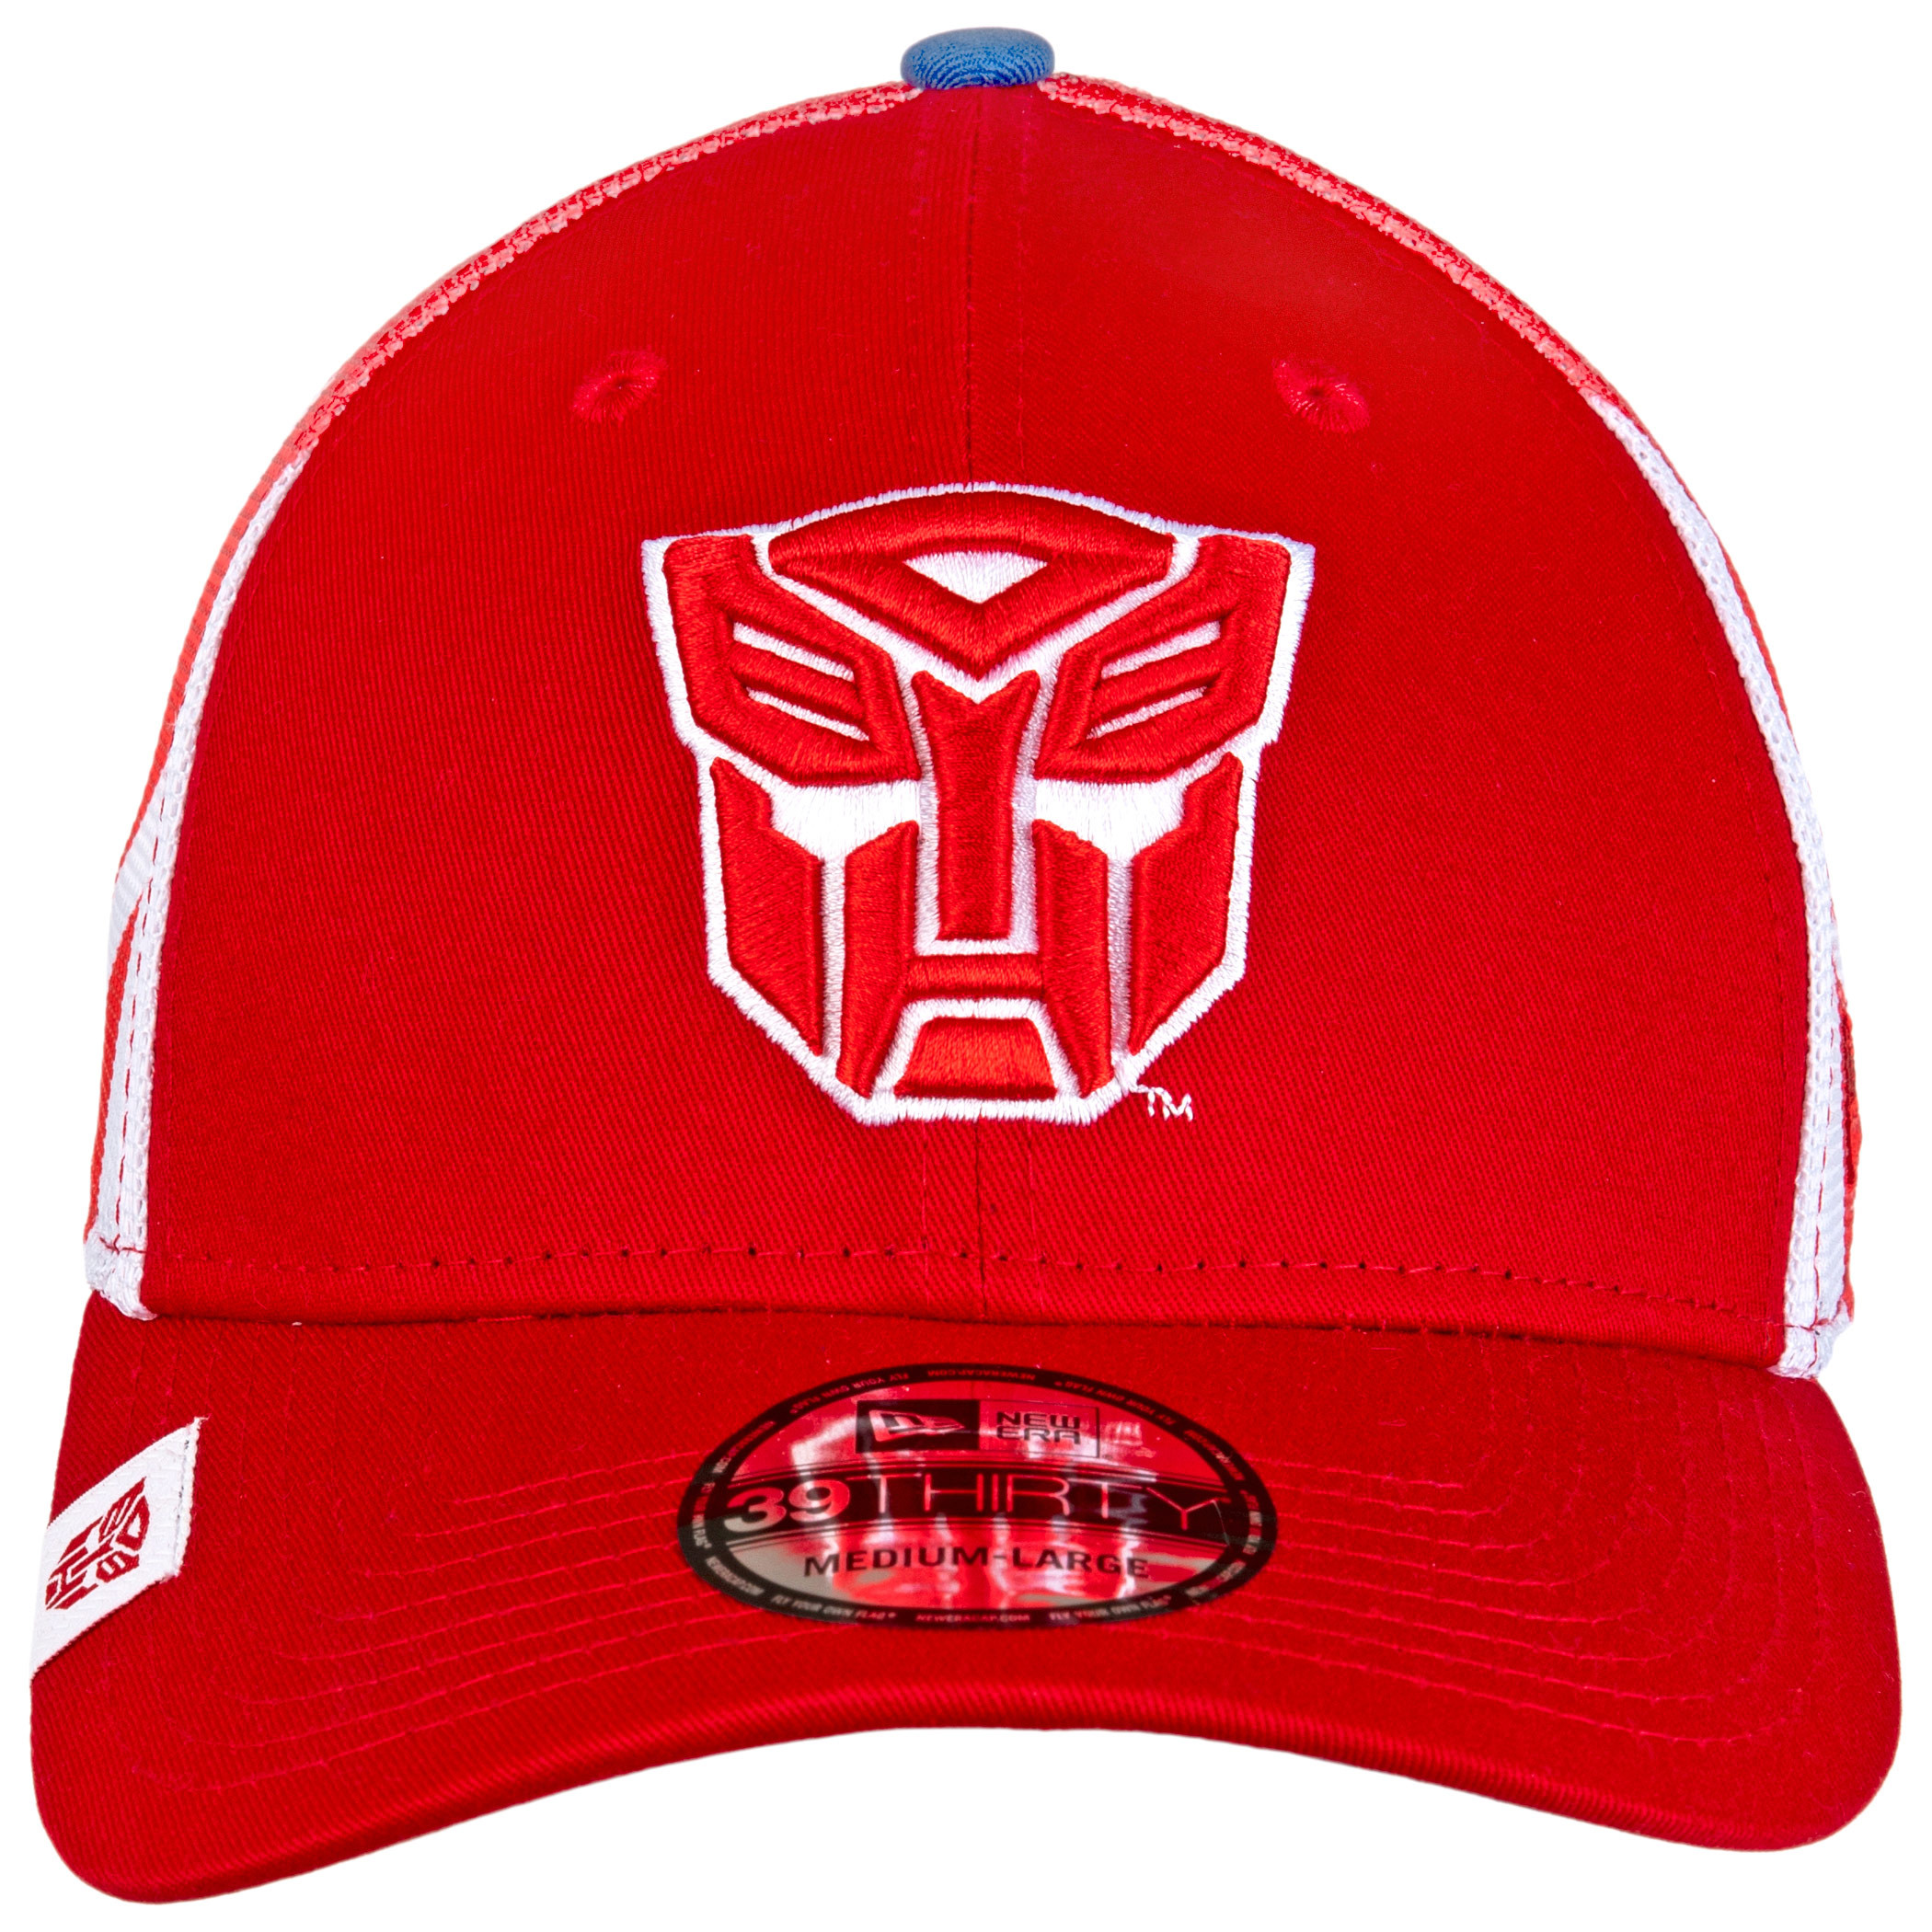 Transformers Autobots New Era 39Thirty Fitted Mesh Hat